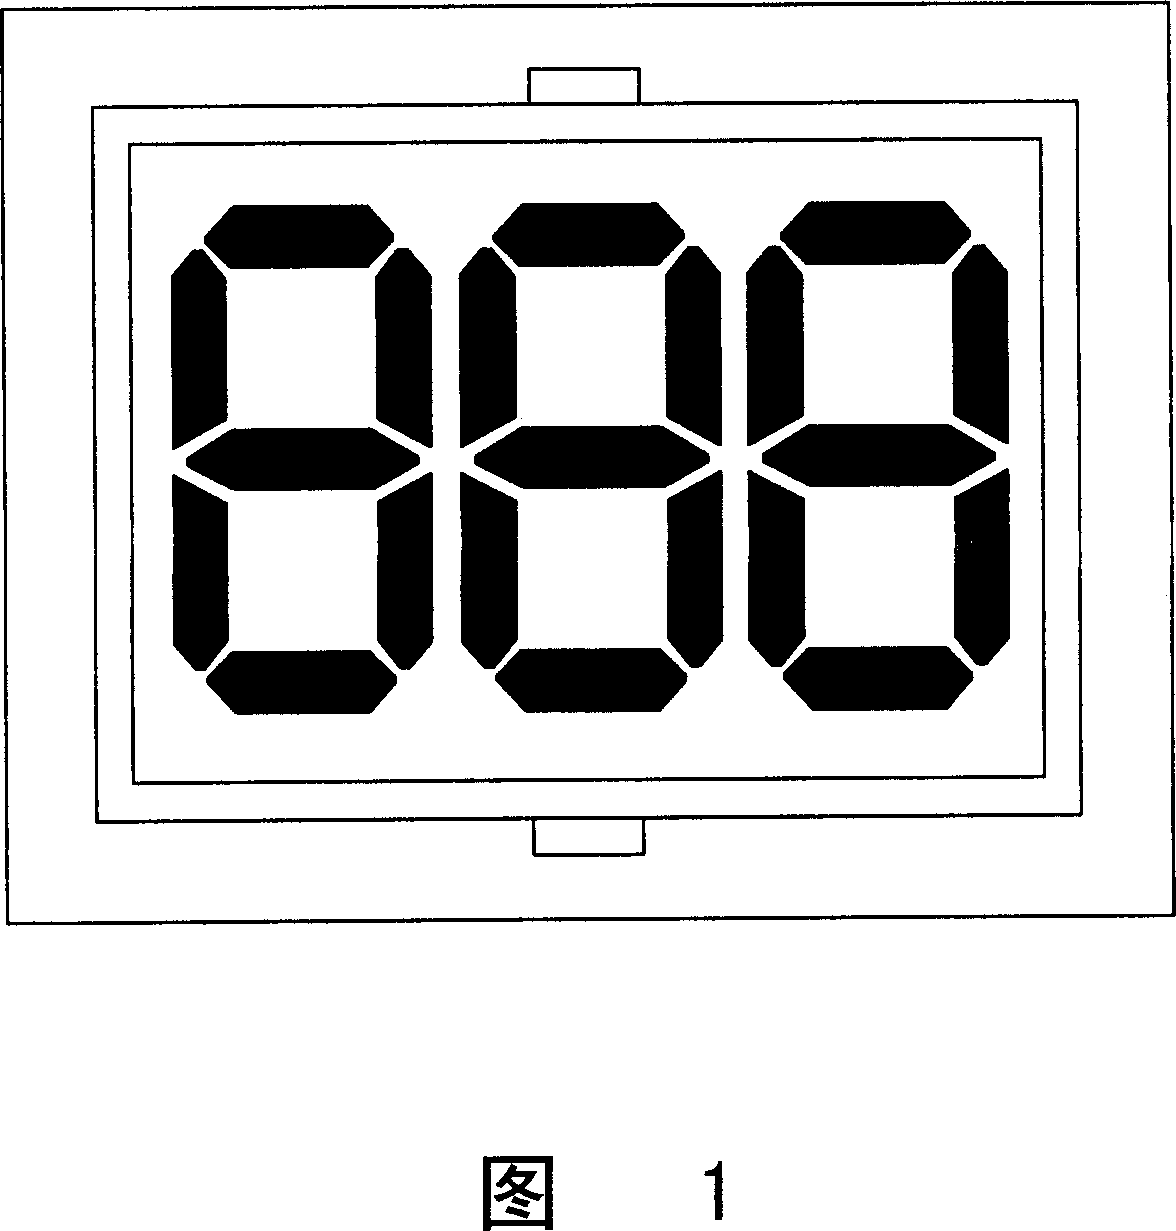 Display screen with function of push button key